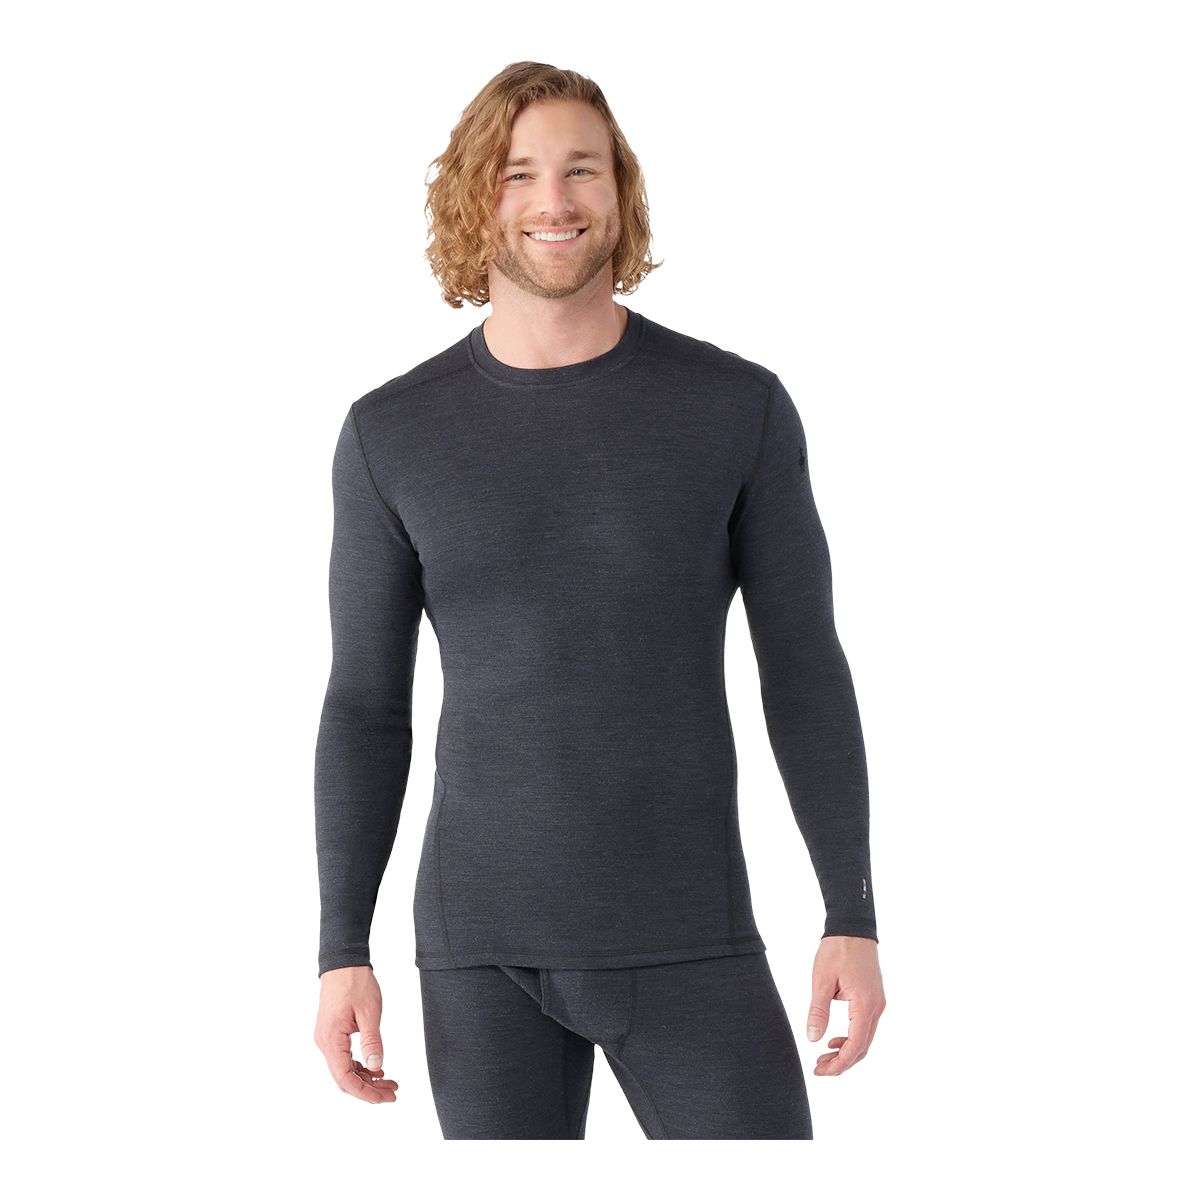 Outbound Men's Thermal Base Layer Crew Neck Long Sleeve Undershirt